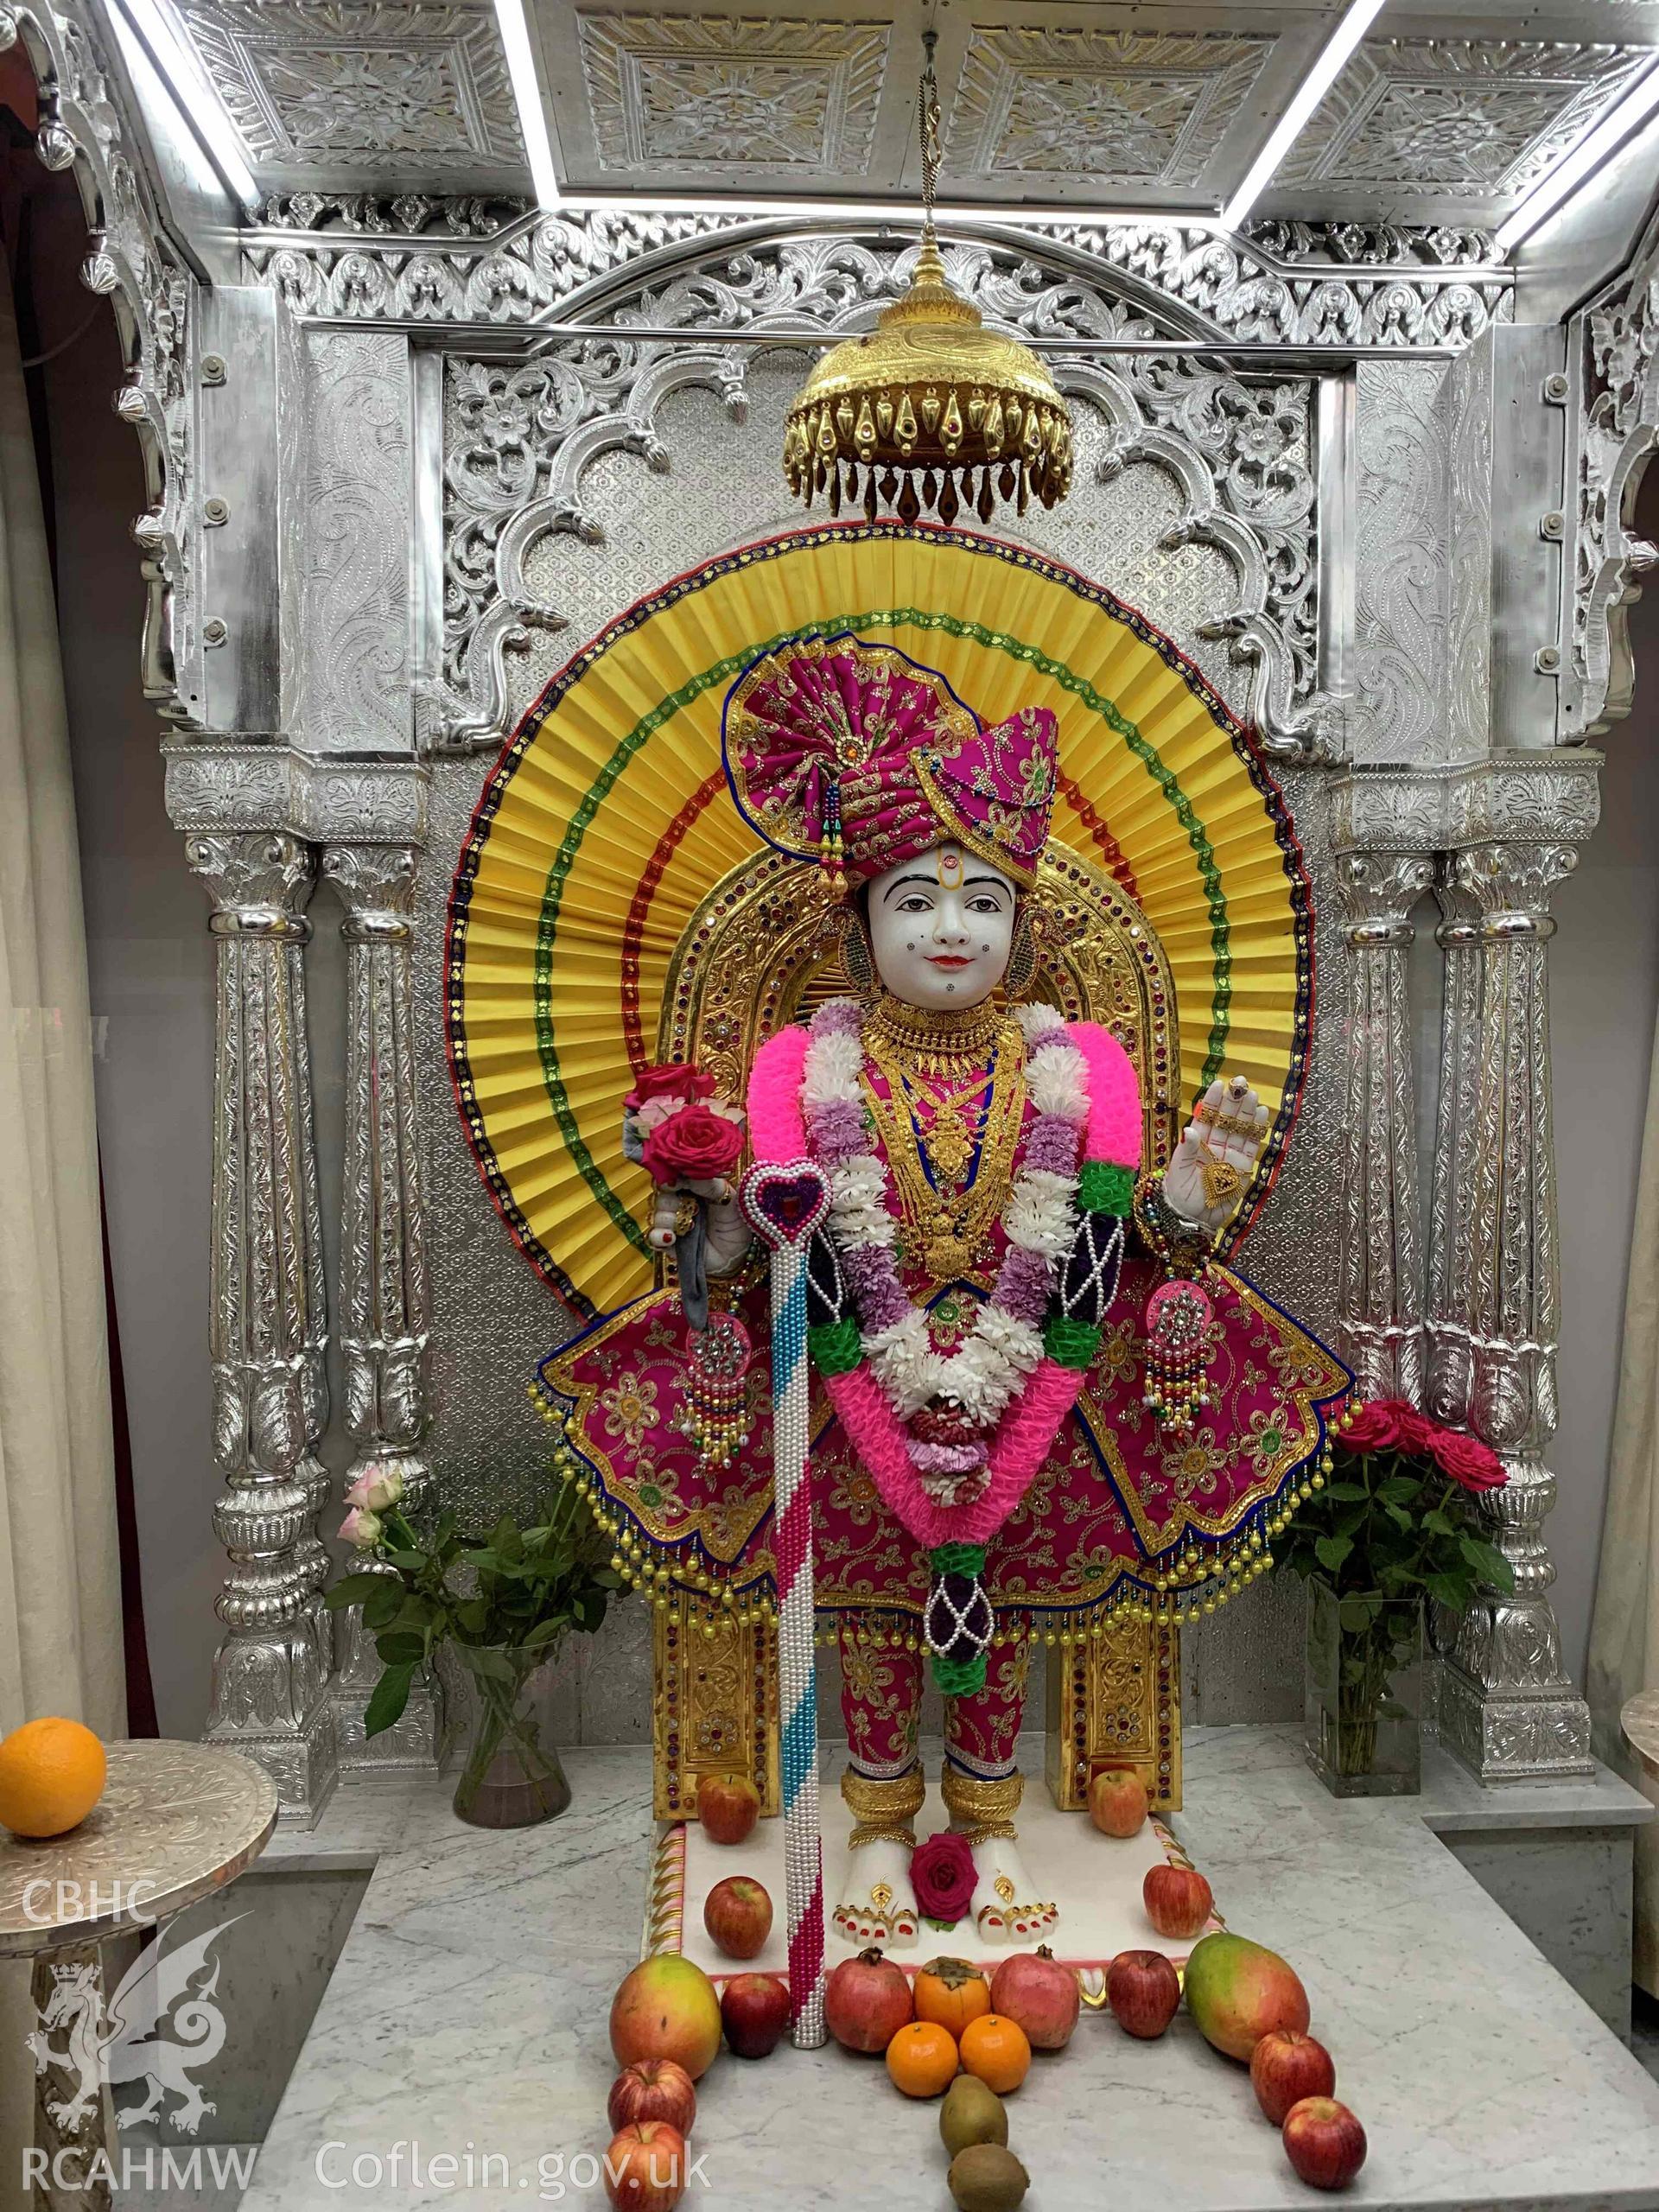 Photograph showing the central shrine is devoted to the founder of the Swaminarayan religion, in Shri Swaminaryan temple, Cardiff, taken in November 2021.